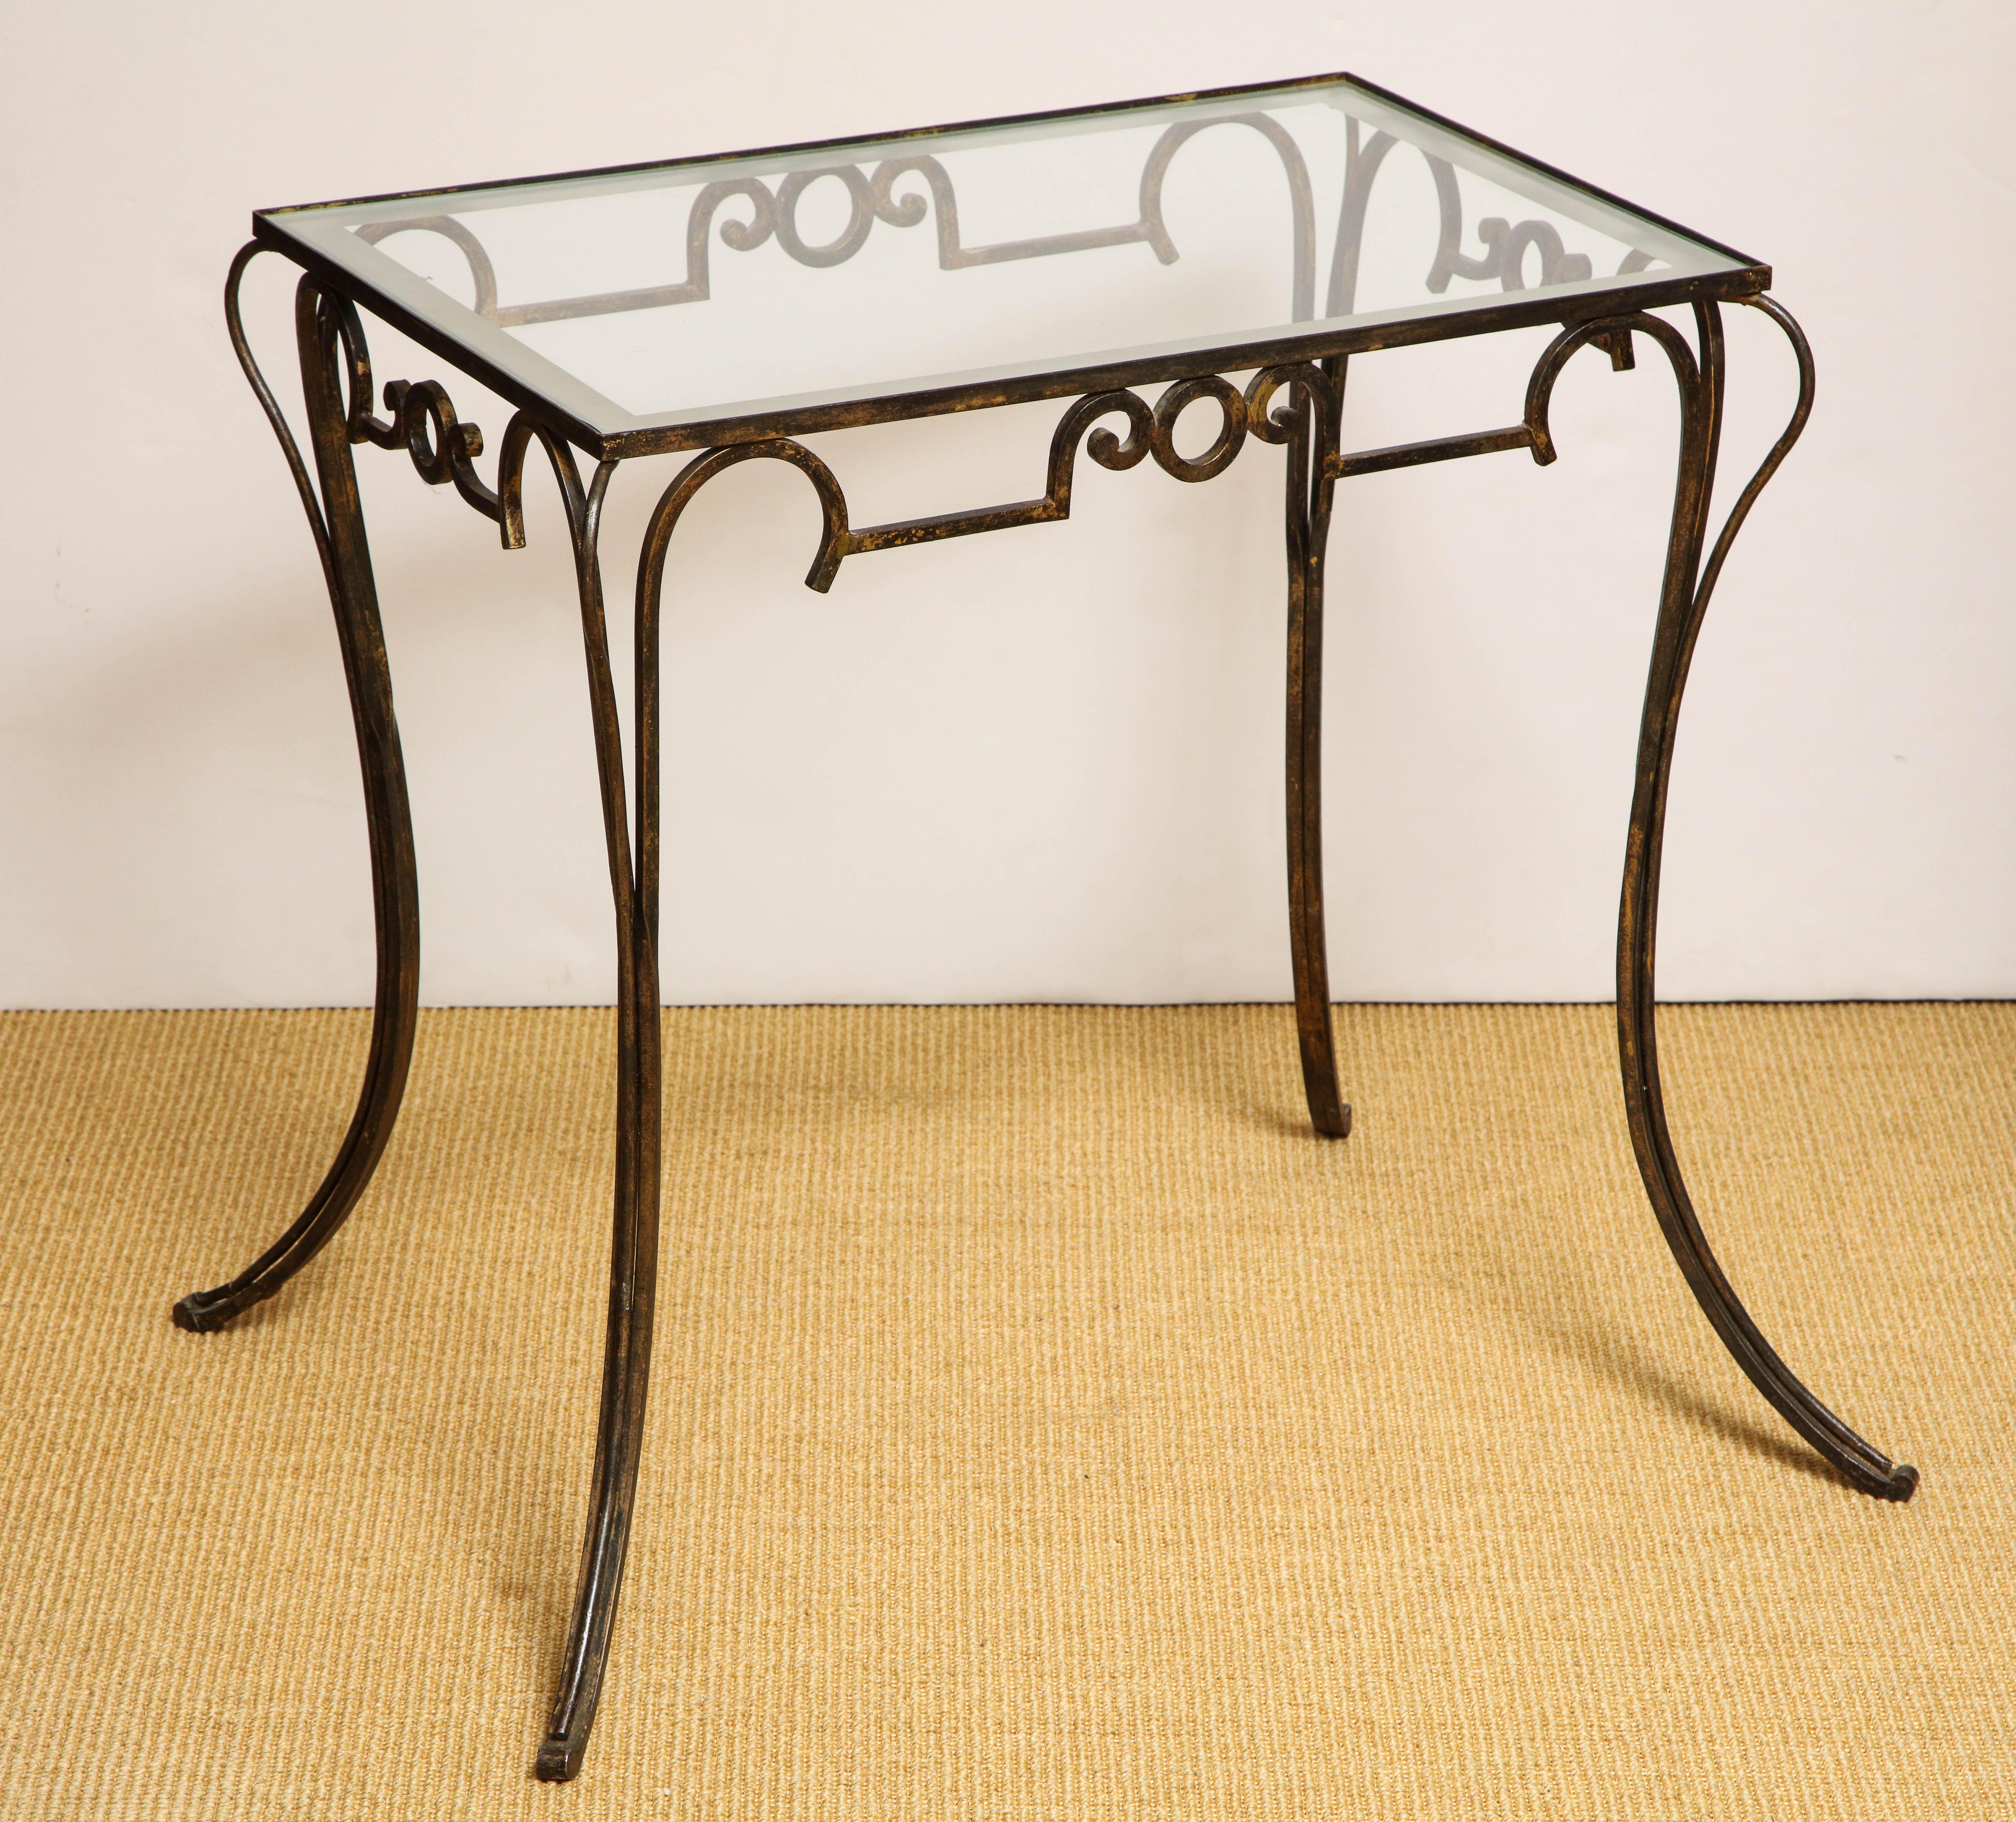 The glass inserted top supported by a scroll work iron base with partial gilding.